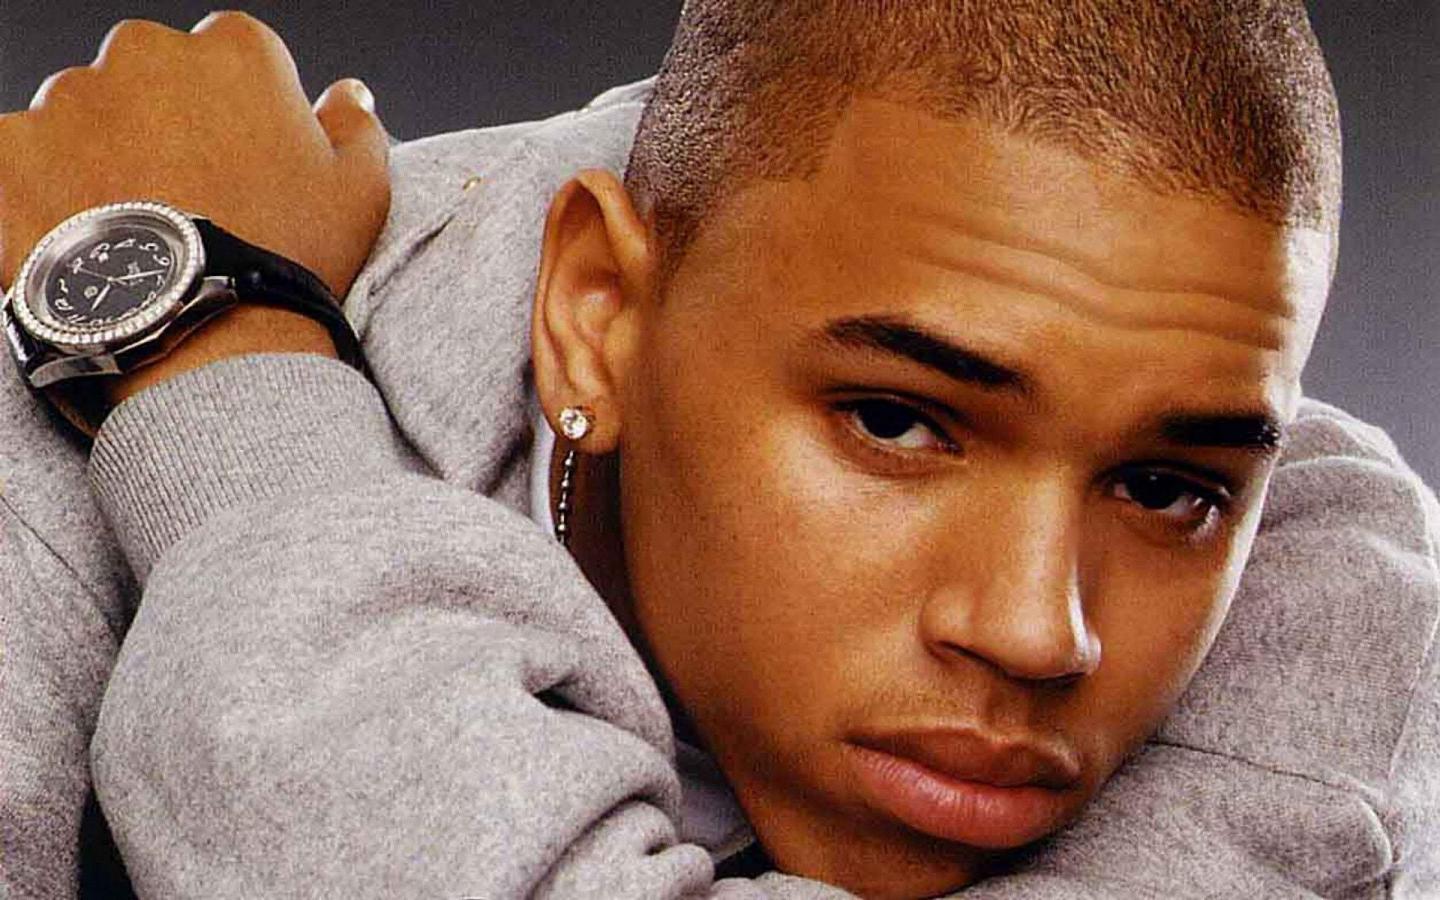 Chris Brown 1440x900 Wallpapers, 1440x900 Wallpapers & Pictures ...